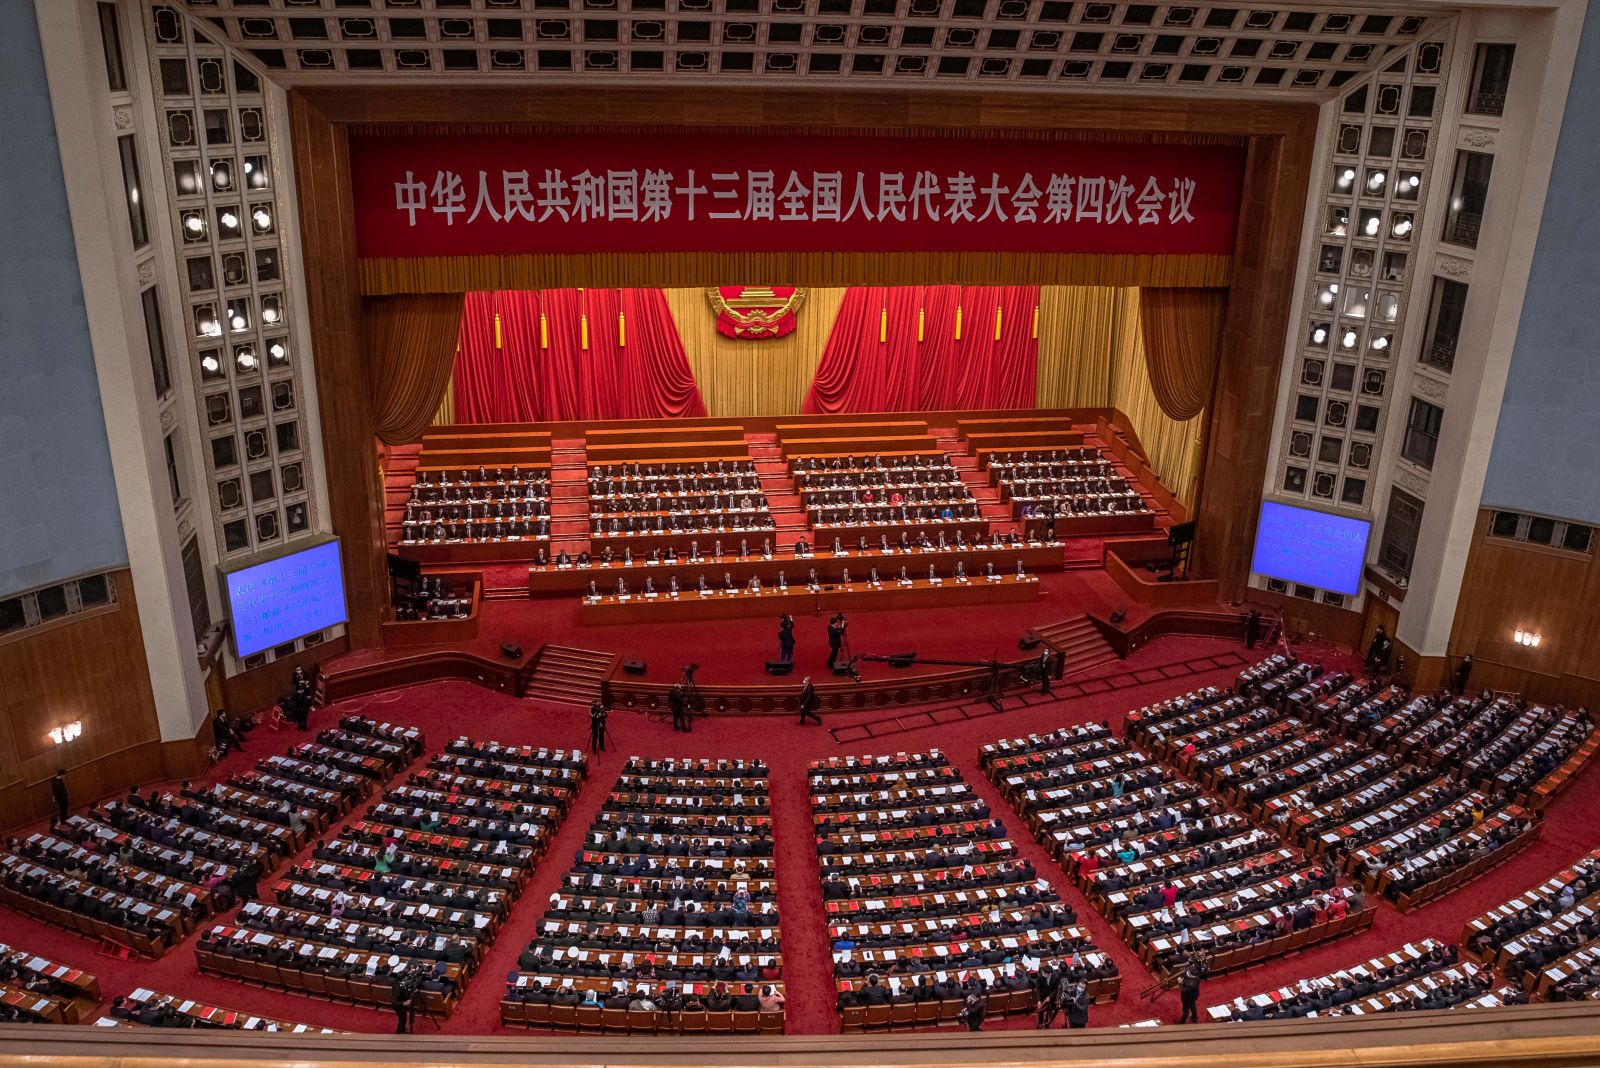 epa09067101 Chinese President Xi Jinping, Premier Li Keqiang and other delegates attend the closing session of the National People’s Congress (NPC), at the Great Hall of the People, in Beijing, China, 11 March 2021. China held two major annual political meetings, The National People’s Congress (NPC) and the Chinese People's Political Consultative Conference (CPPCC) which run alongside and together known as 'Lianghui' or 'Two Sessions'.  EPA/ROMAN PILIPEY / POOL